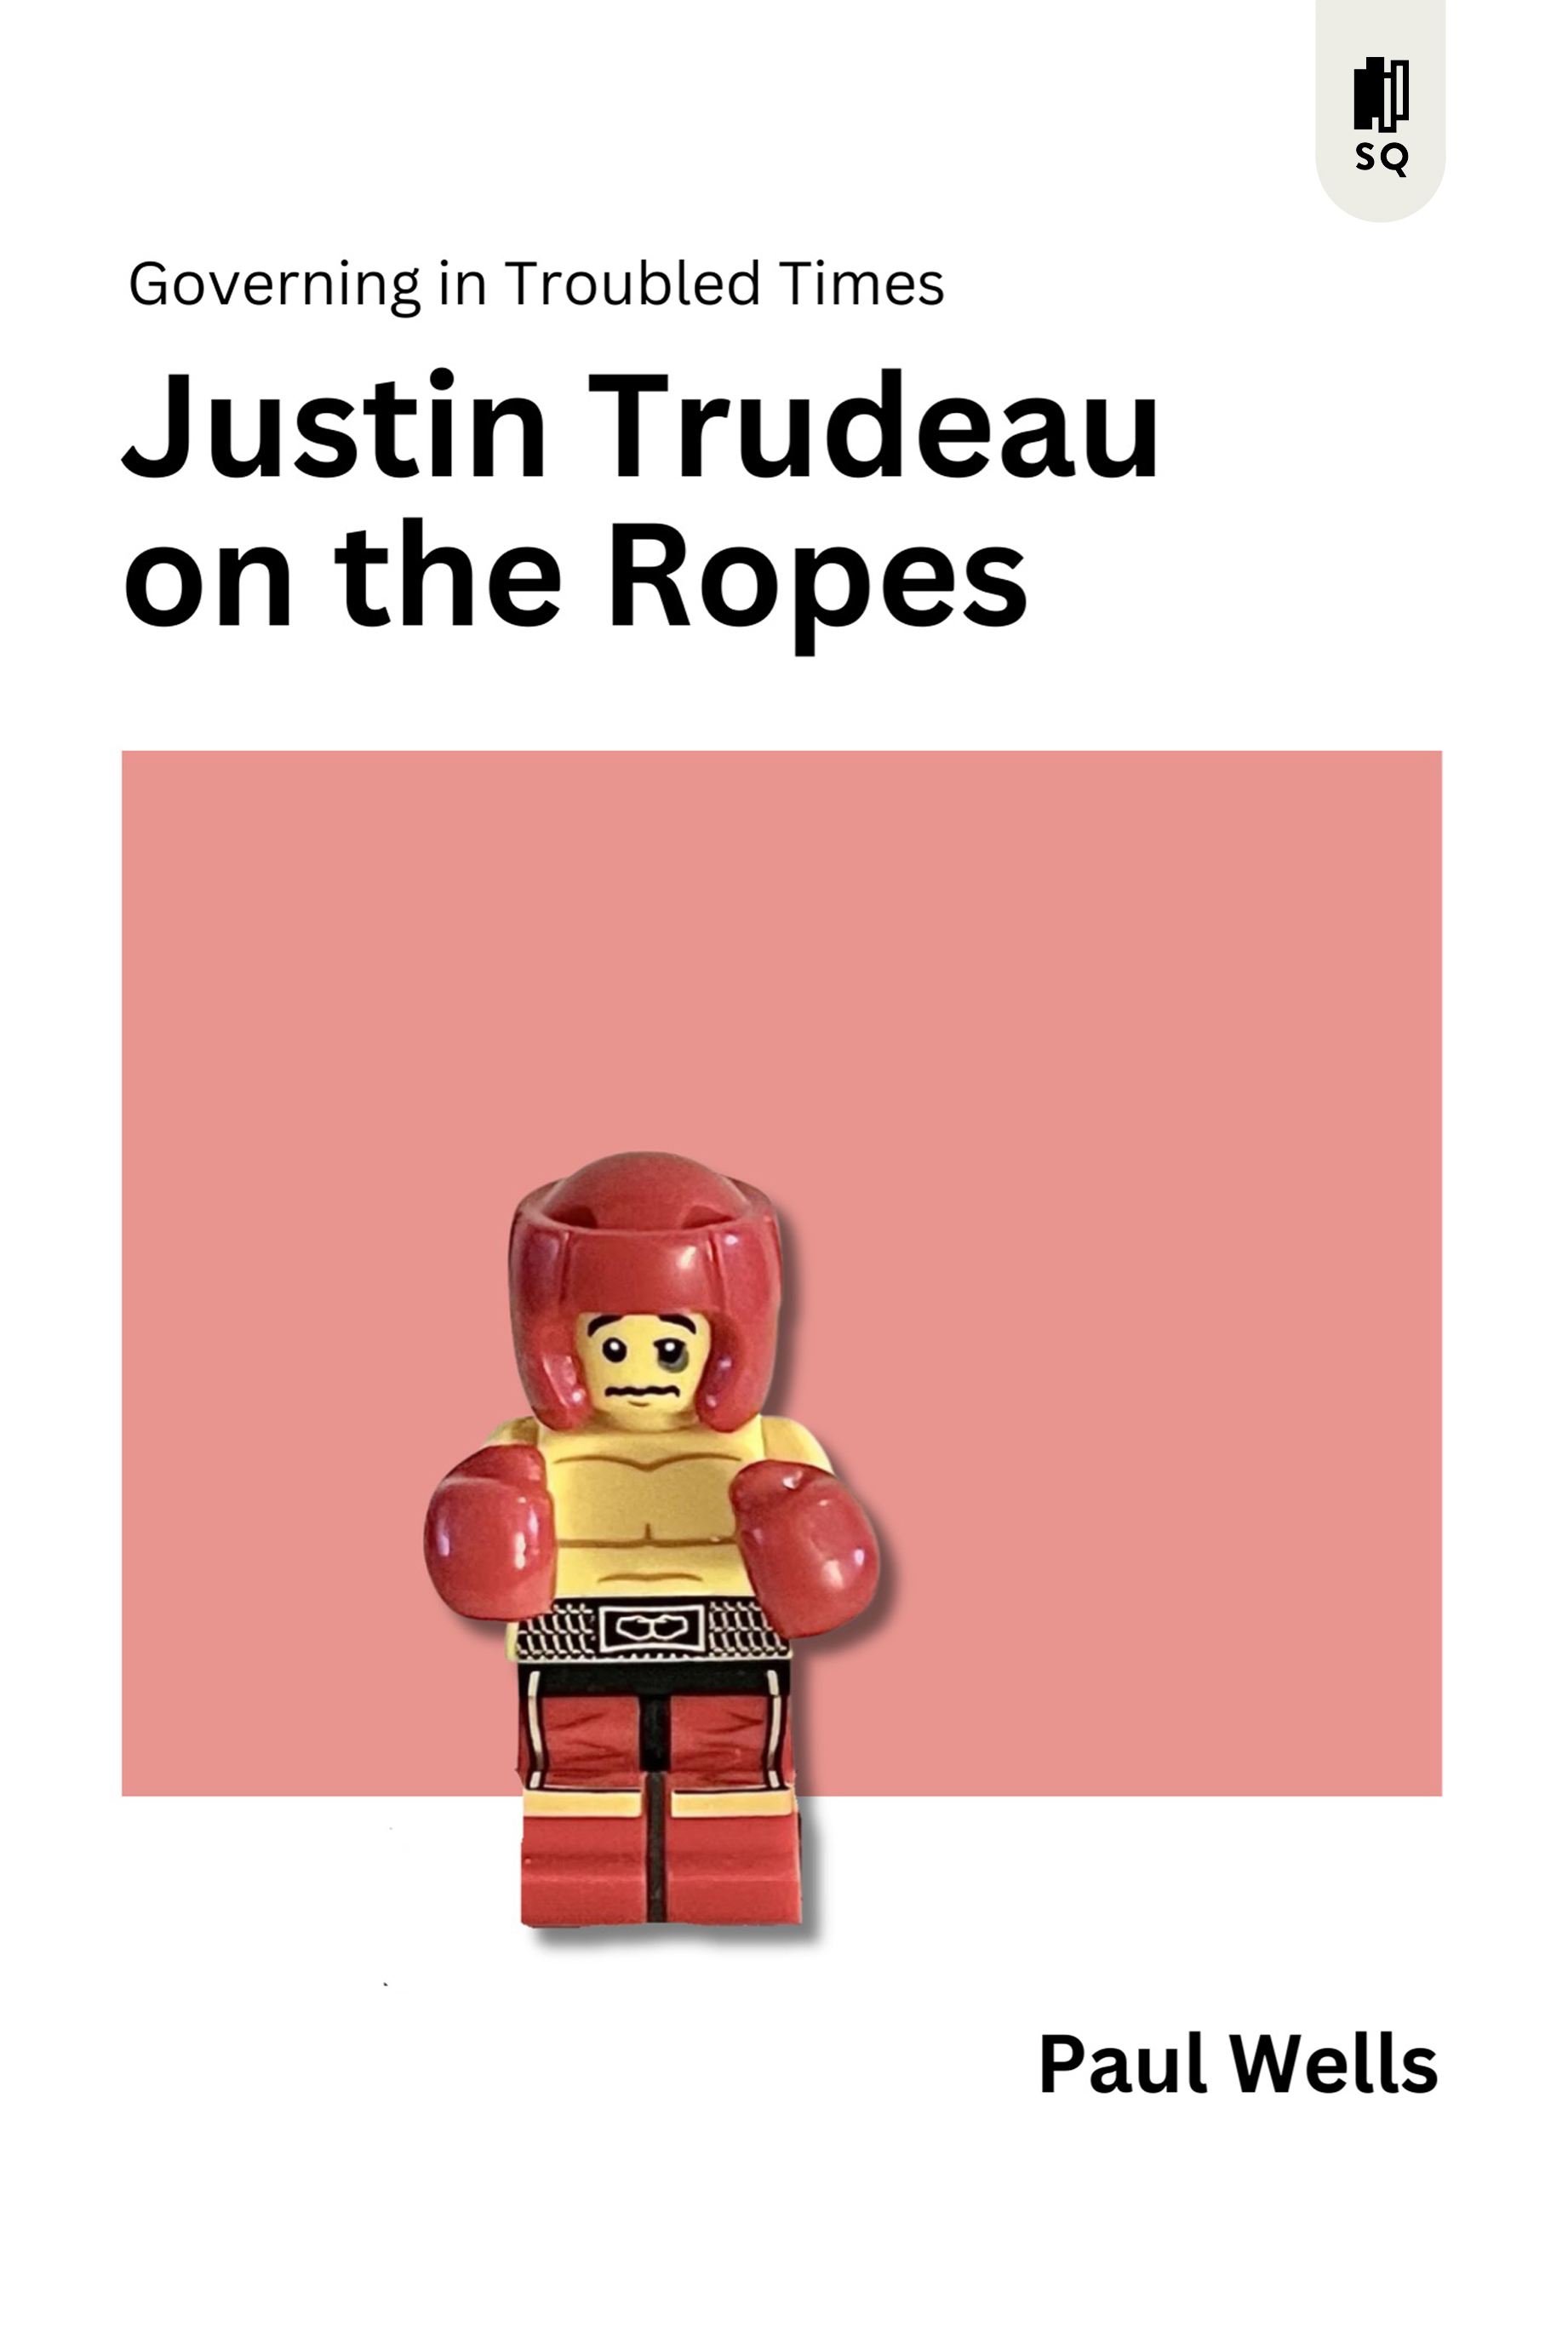 Justin Trudeau on the Ropes